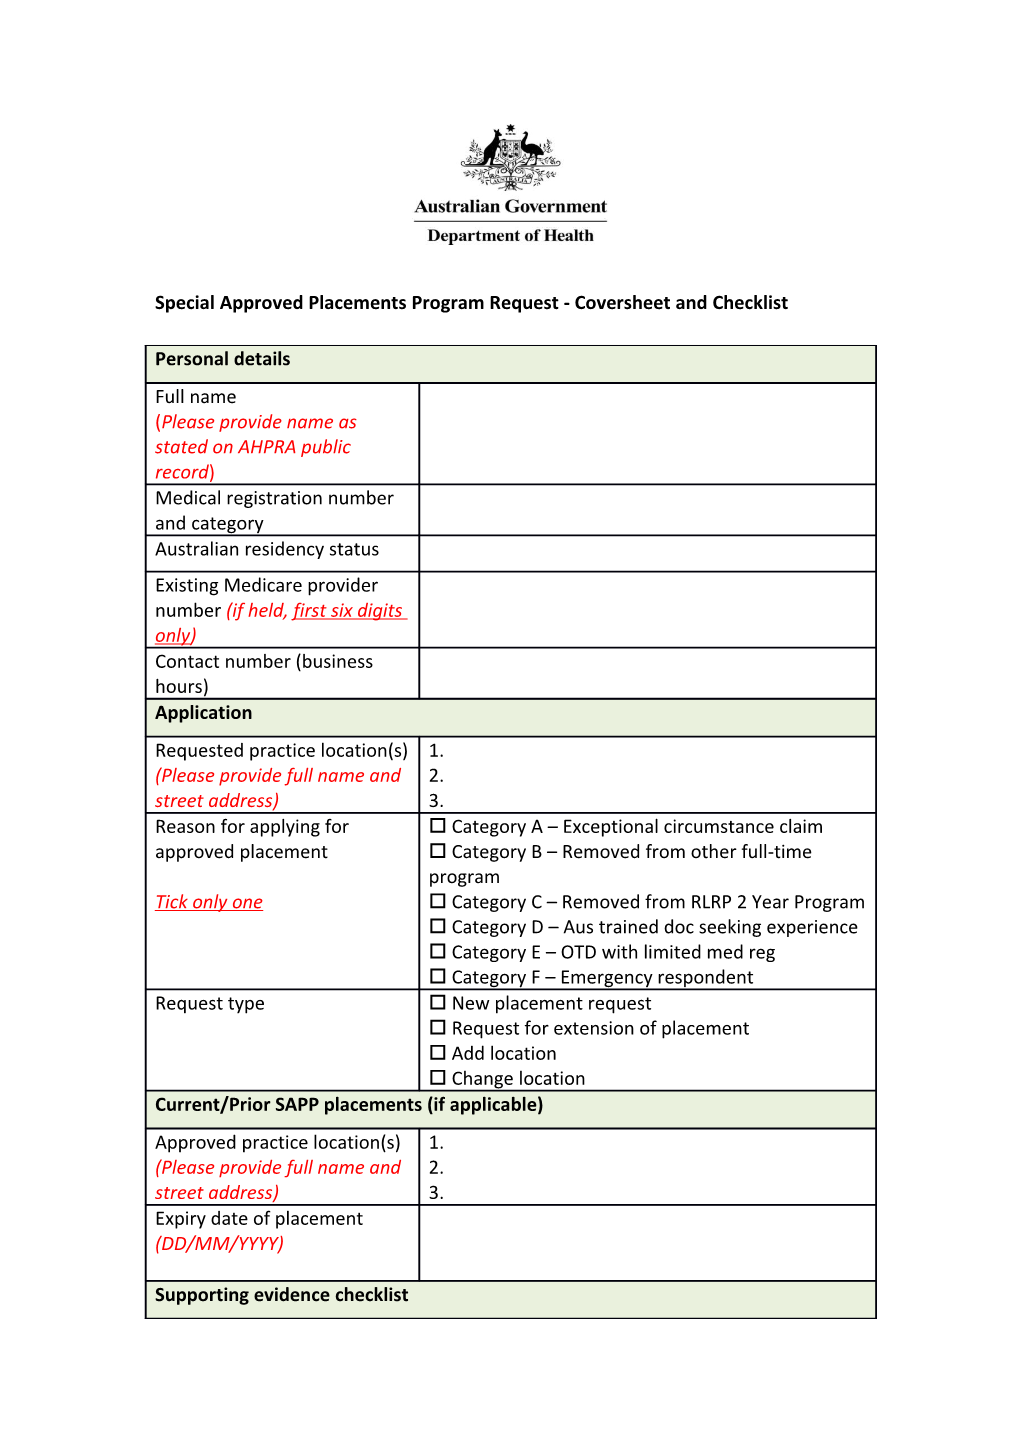 Special Approved Placements Program - Coversheet and Checklist